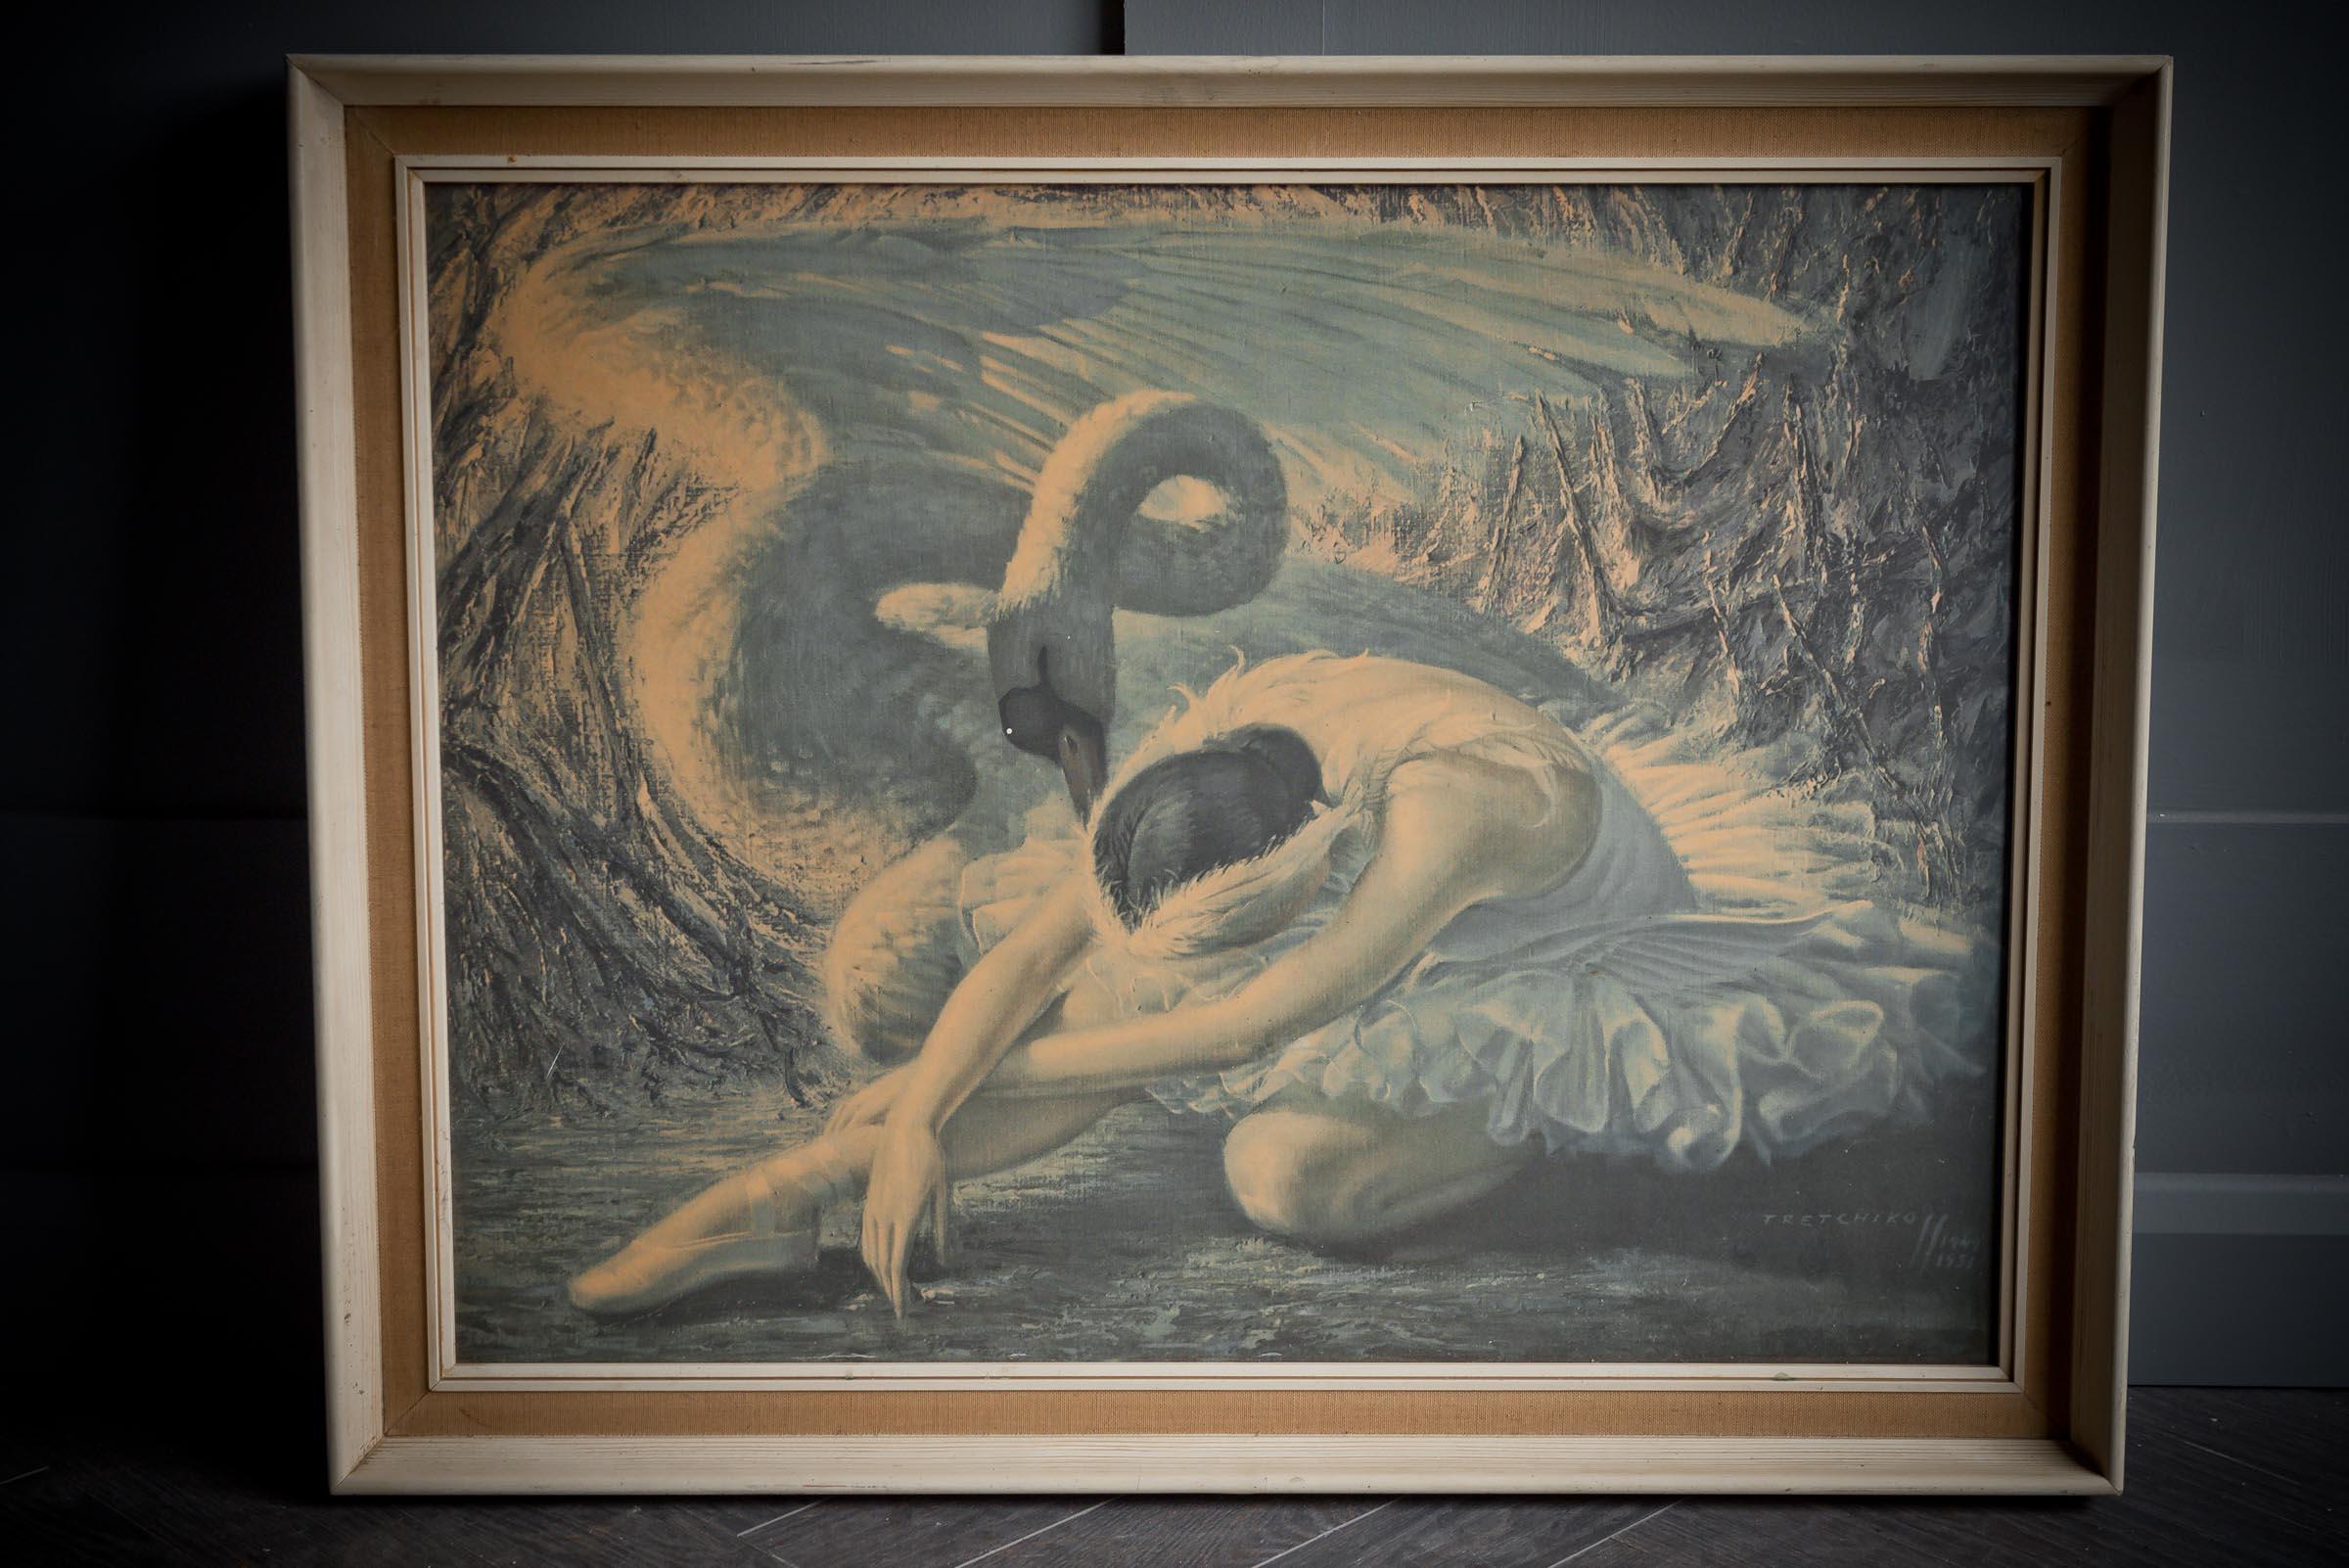 tretchikoff dying swan print value